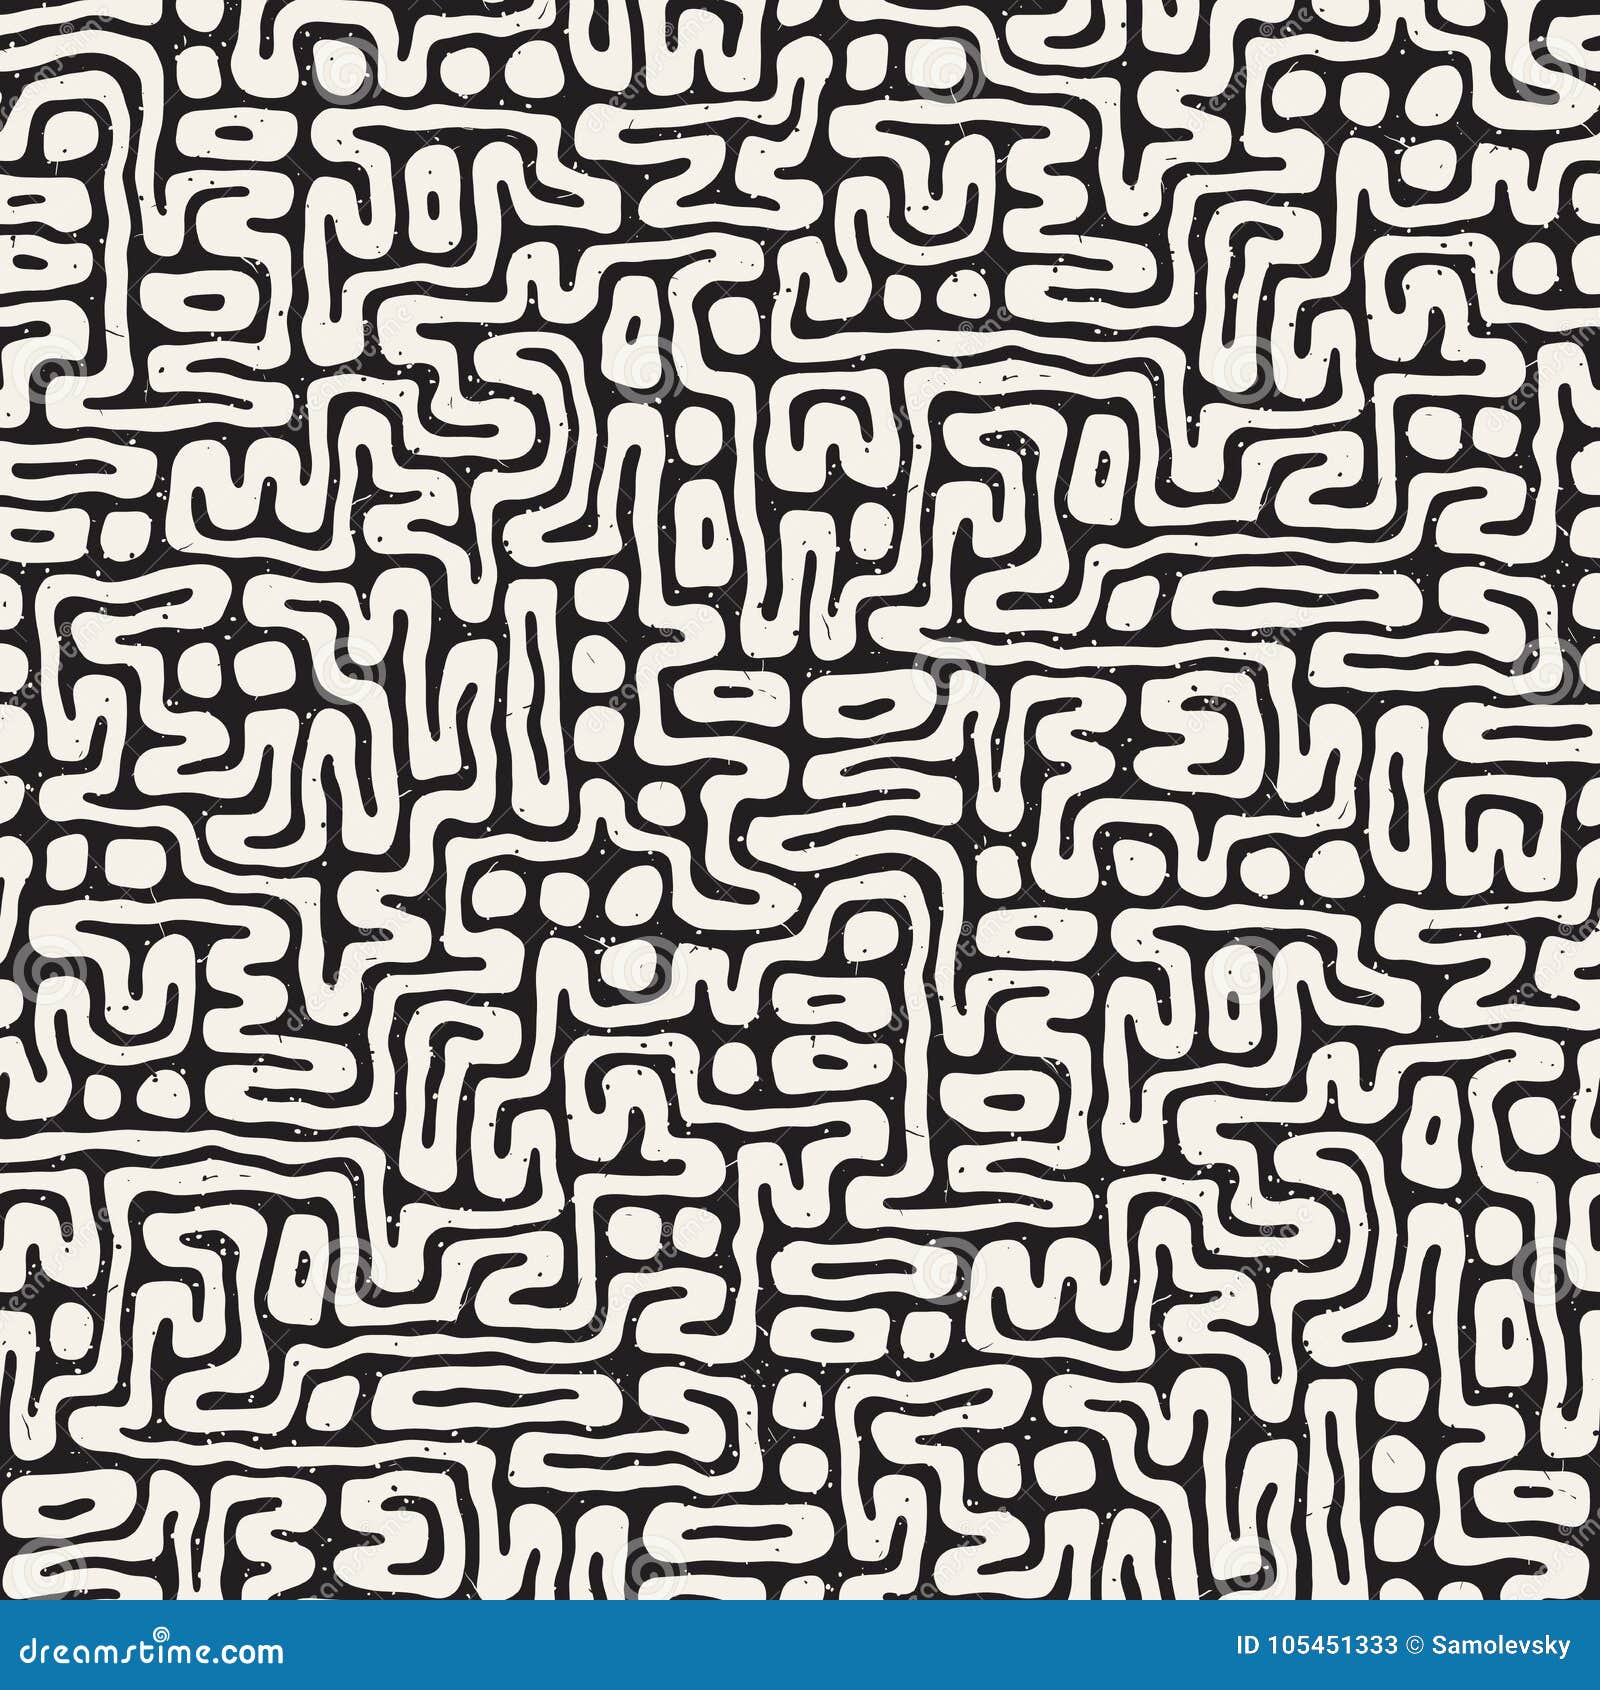 Vector Seamless Black and White Rounded Irregular Maze Pattern ...